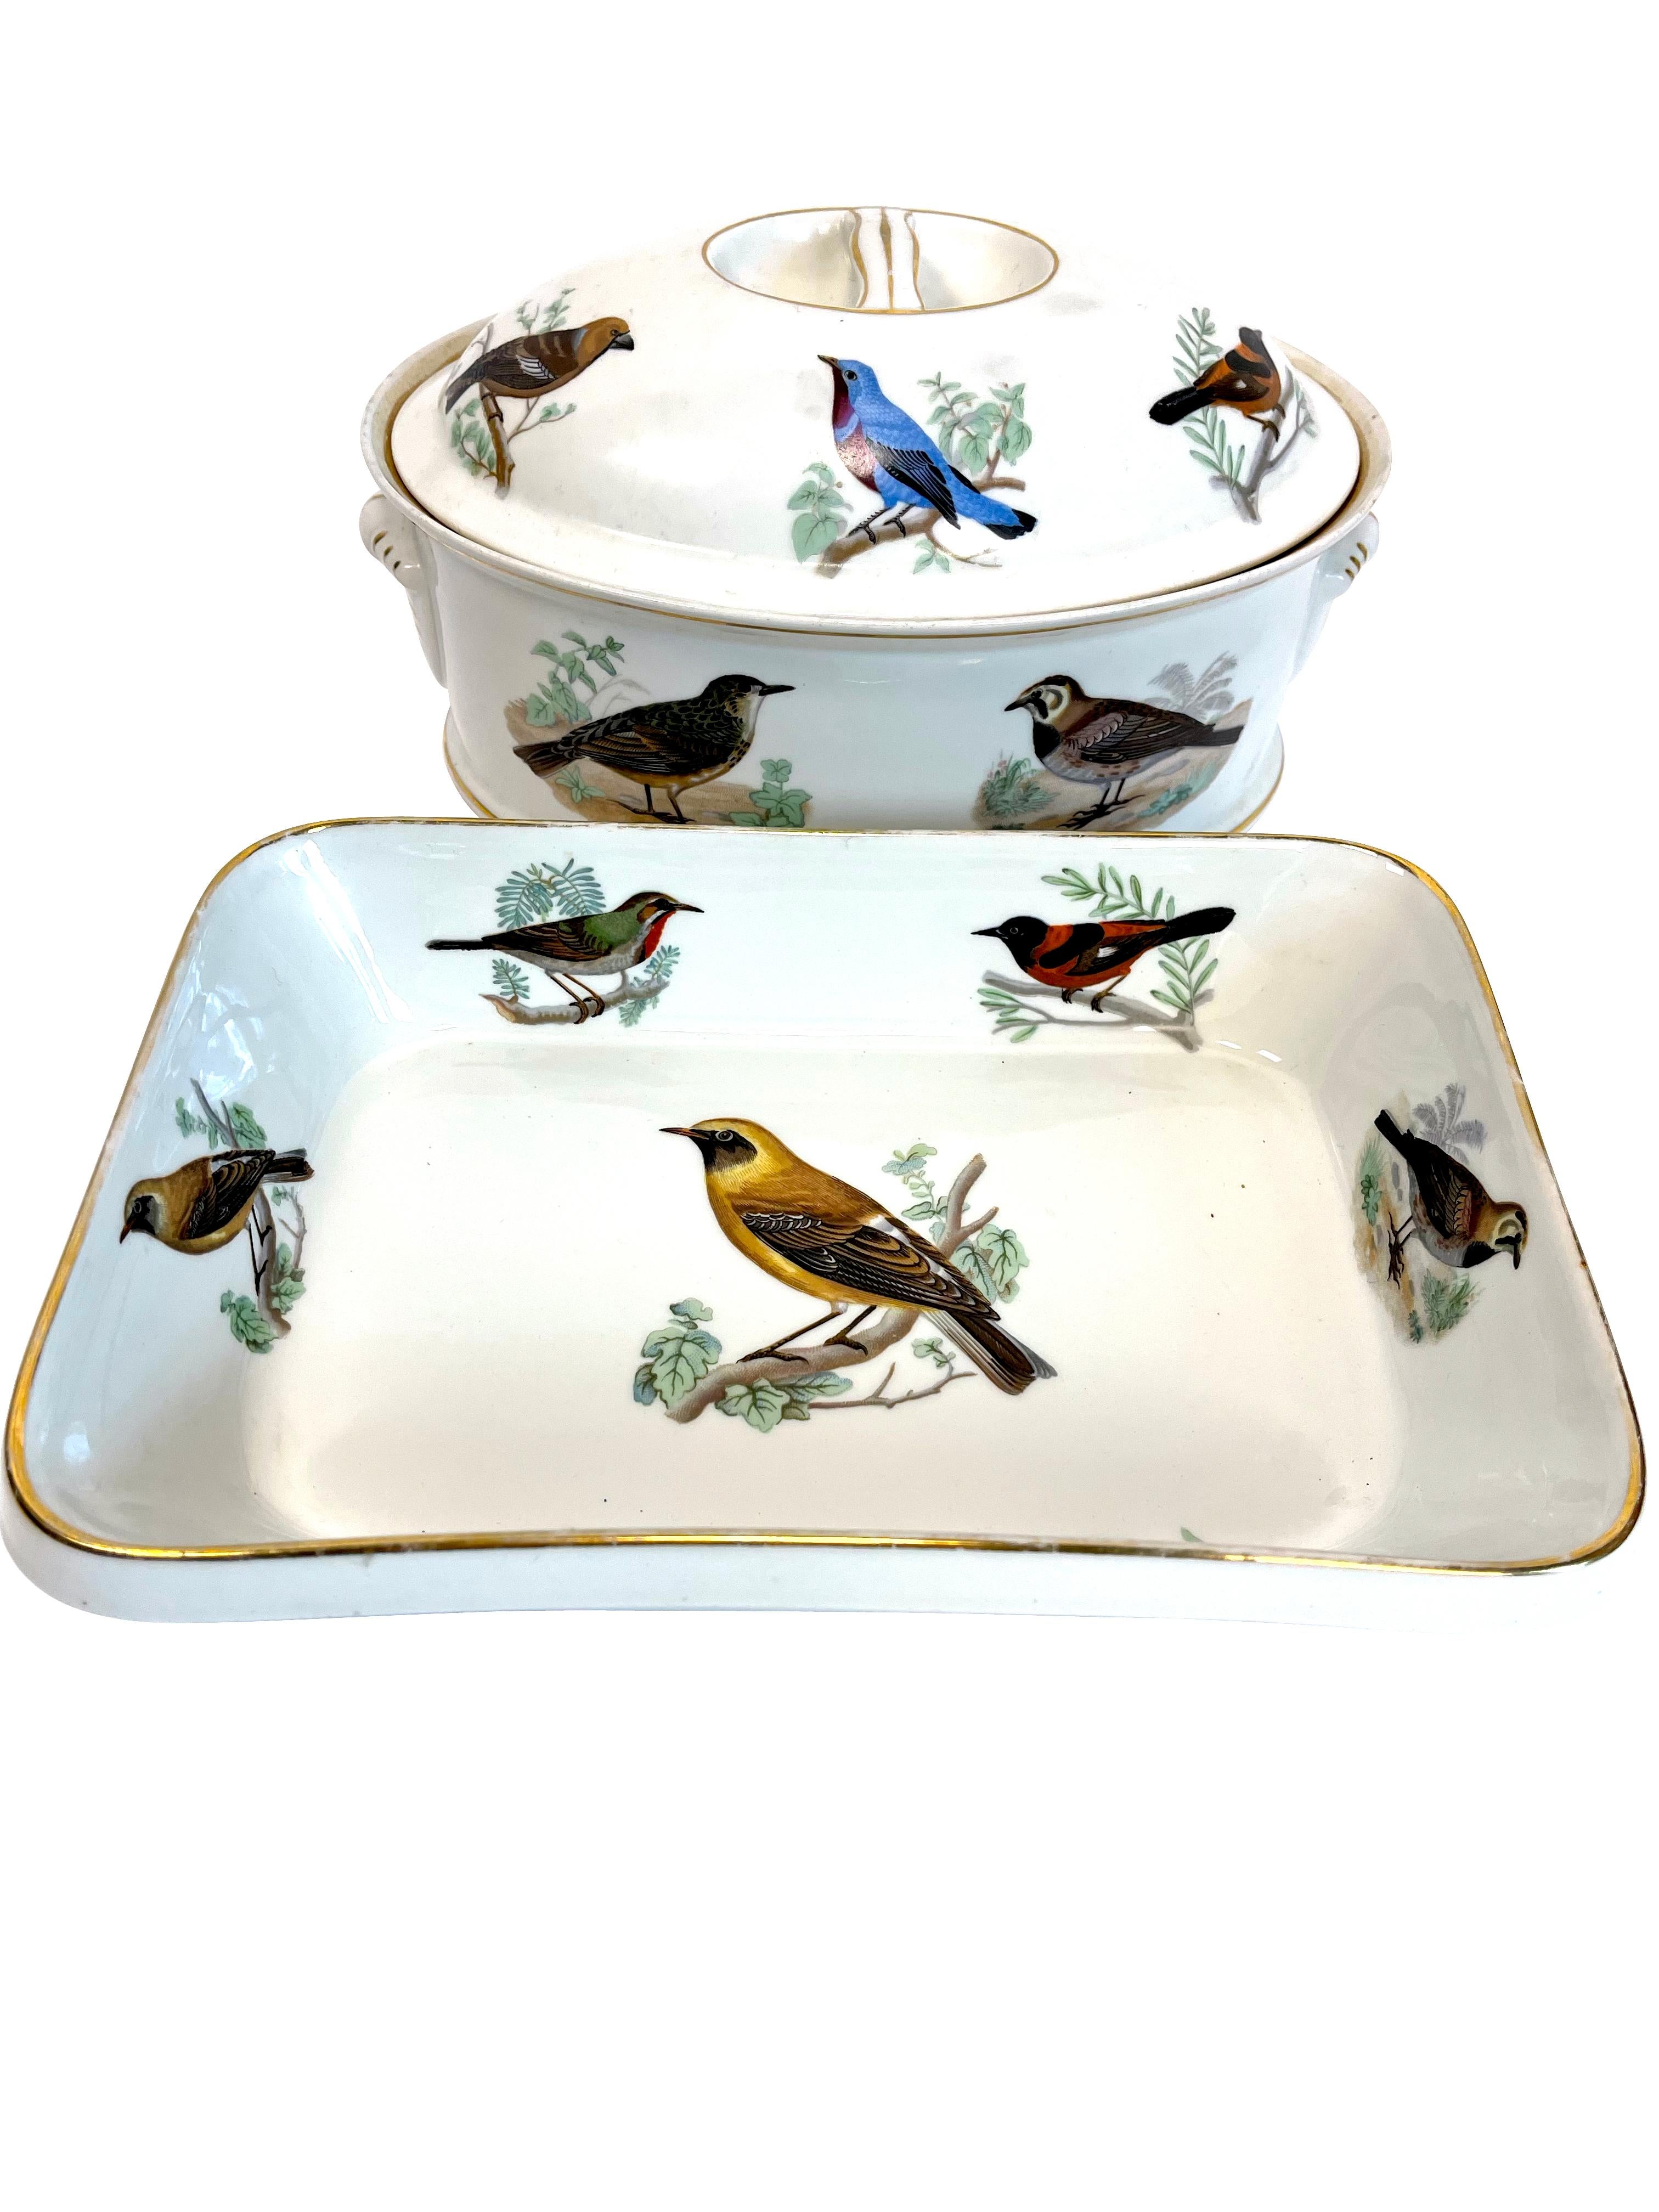 Le Faune Birds Lourioux Fire Proof French Porcelain Casseroles ,French porcelain serving pieces group of four with bird decoration- oval casserole, petit round casserole, and two rectangular baking dishes. All ovenproof with various bird designs.